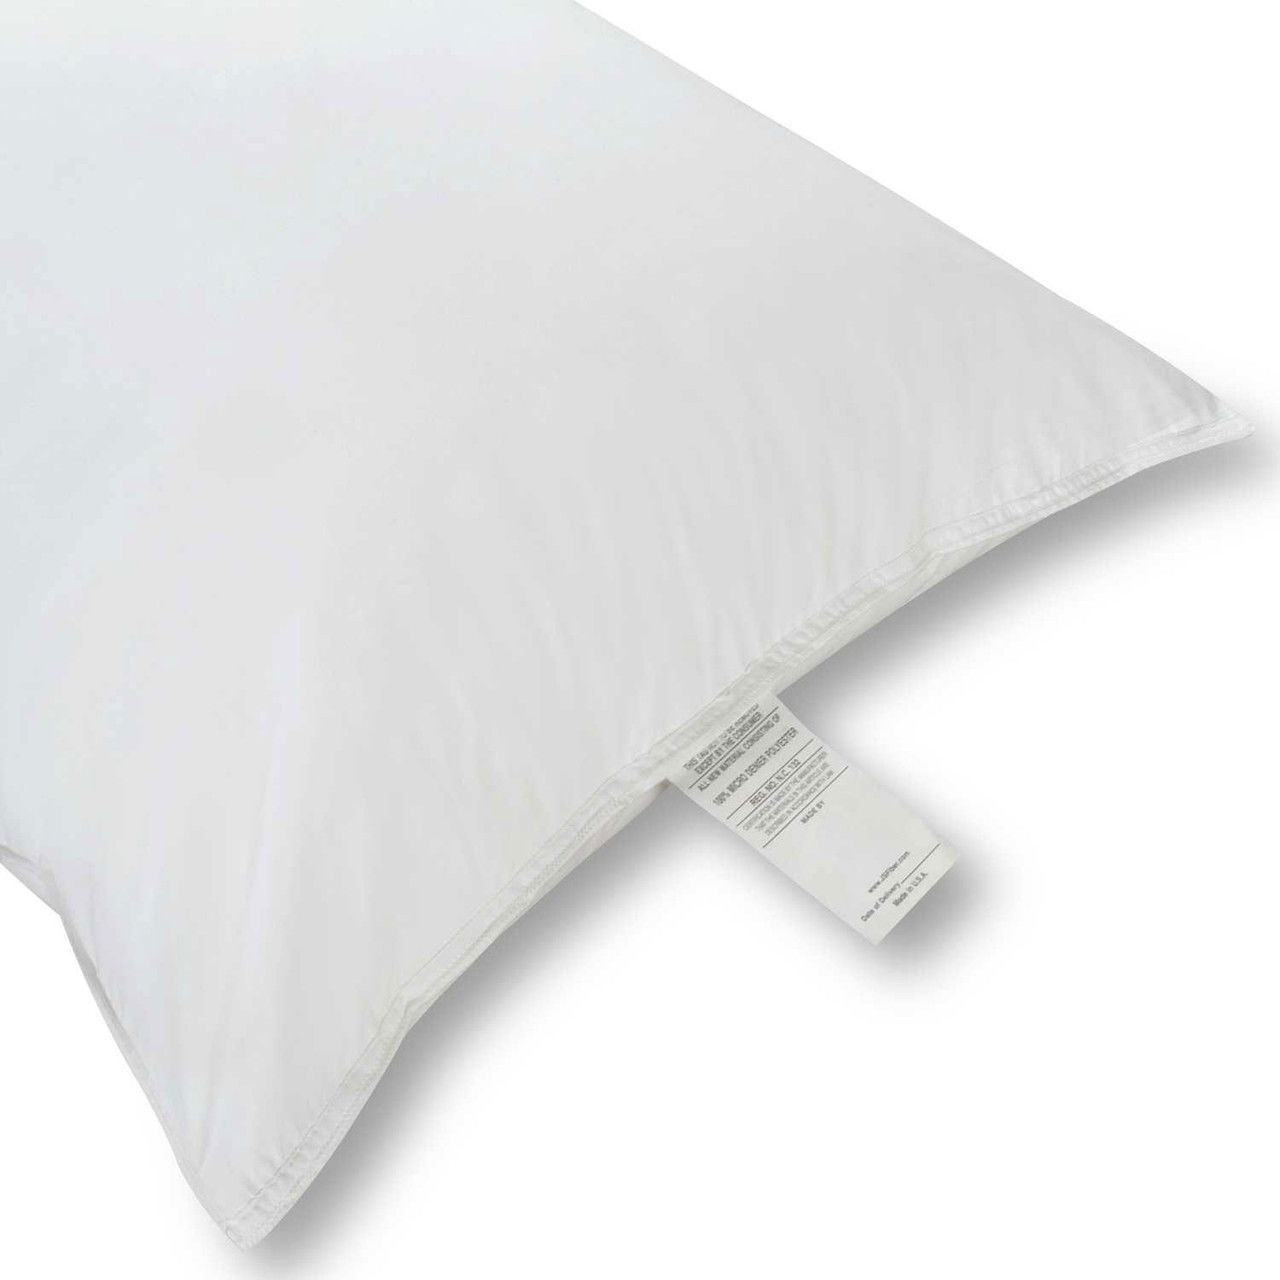 What sizes does the pillow at JS The Classic Hotel come in?